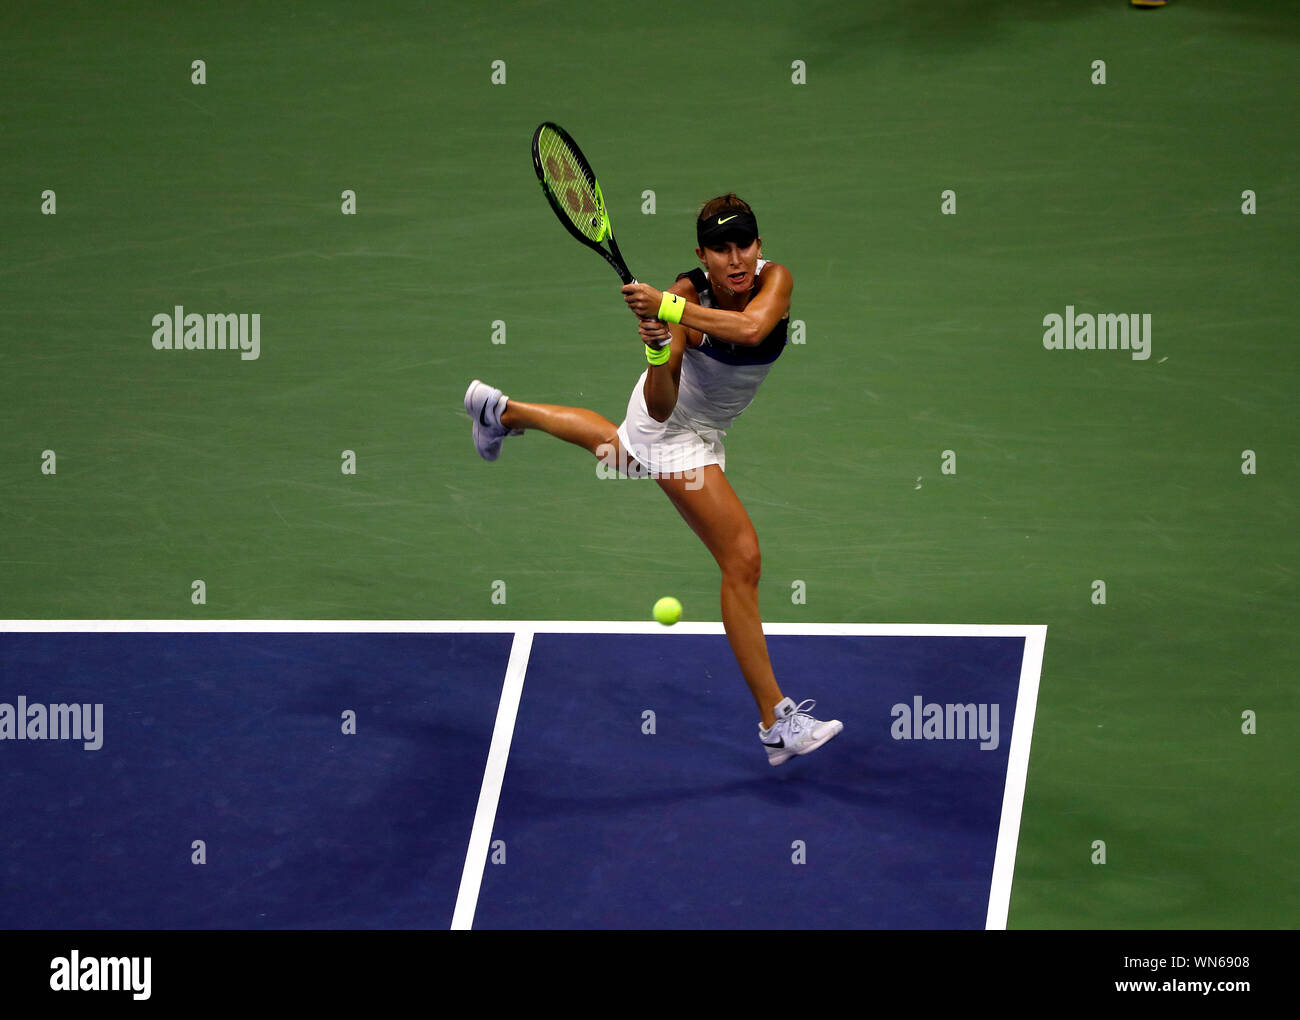 Flushing Meadows, New York, United States - 5 September 2019.  Belinda Bencic of Switzerland in action during here semi final against Canada's Bianca Andreescu at the US Open in Flushing Meadows, New York.  Andreescu won the match in straight sets and will face Serena Williams in Saturday's final Credit: Adam Stoltman/Alamy Live News Stock Photo